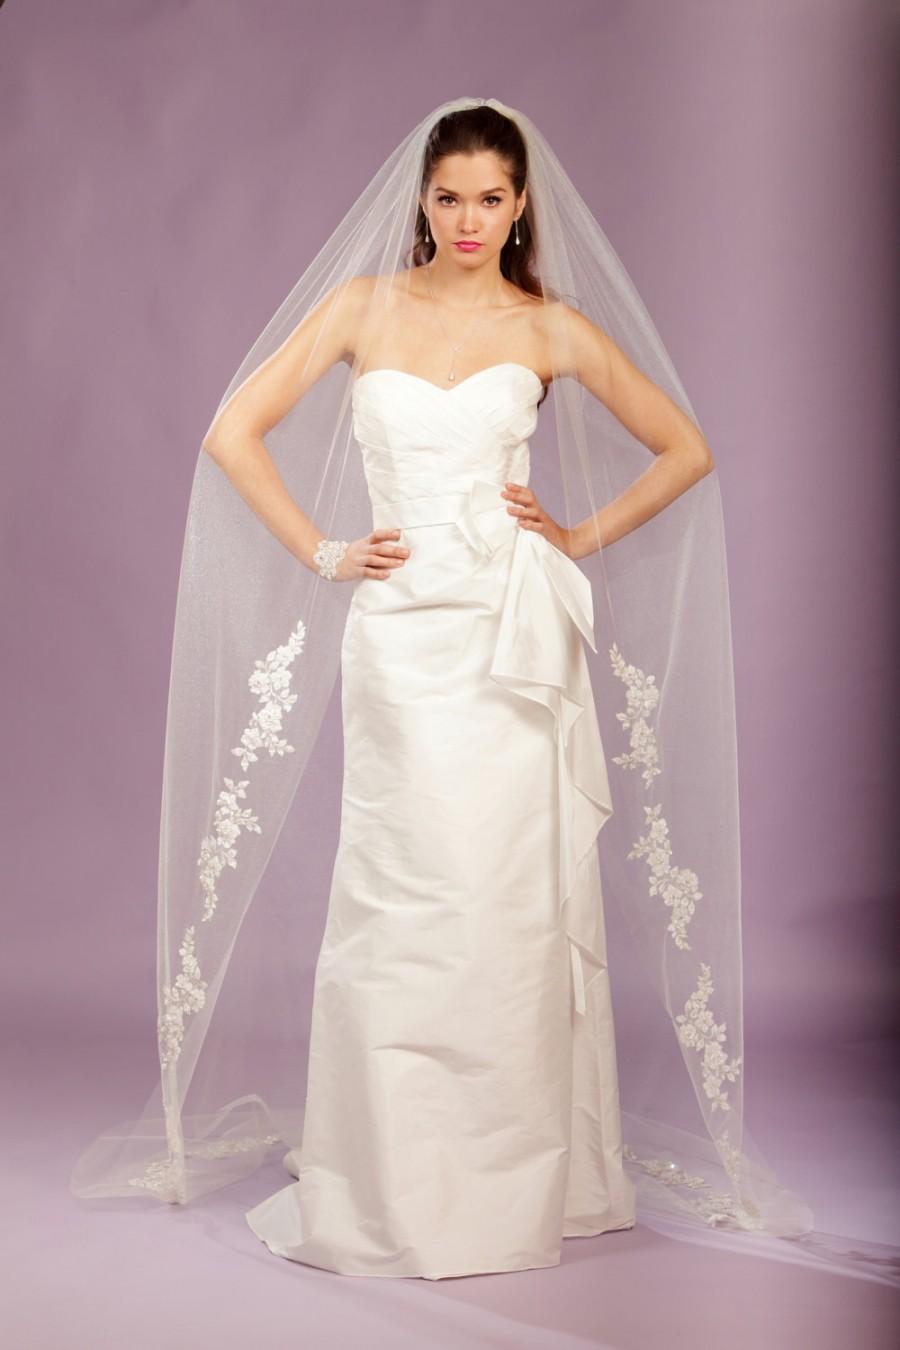 Wedding - Wedding Veil -Cathedral Veil, FRENCH Appliques Adorned with Swarovski Crystals, Embroidery, and Sequins - made to order